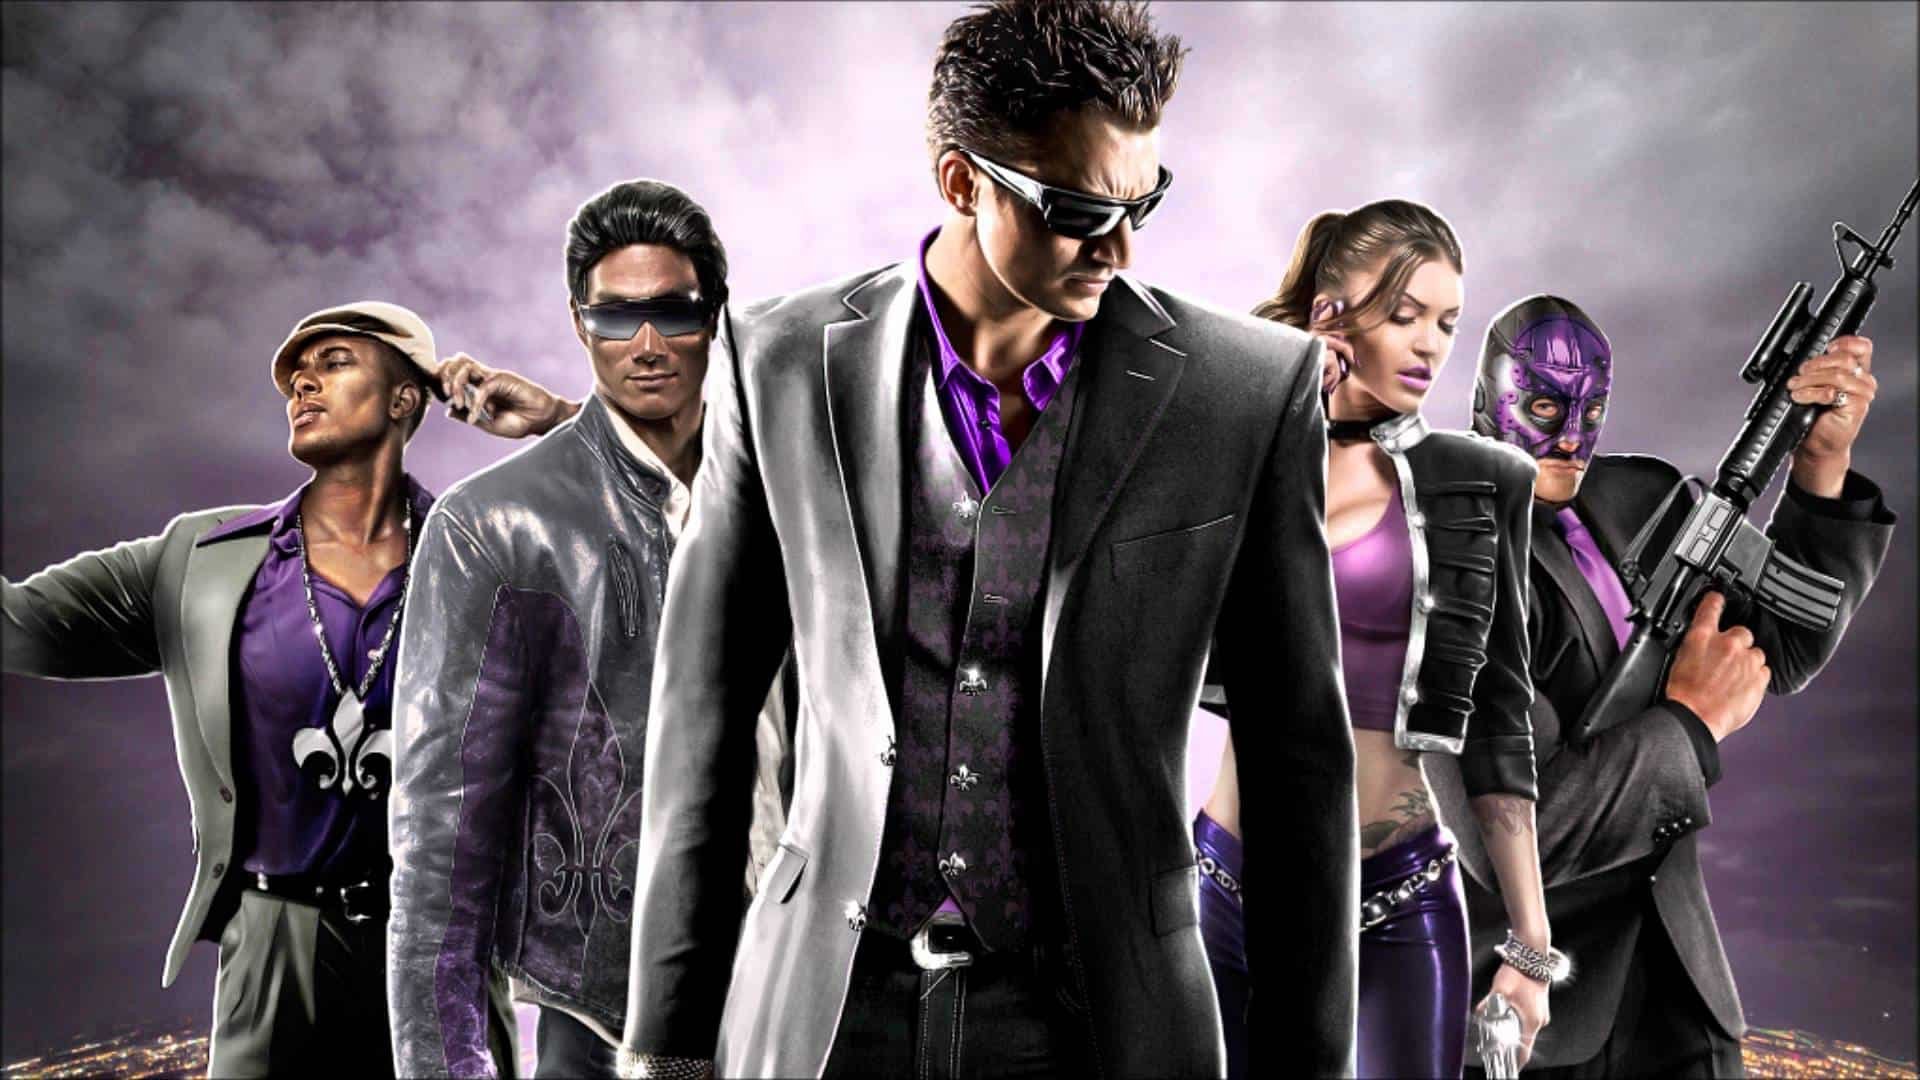 saints row 3 remastered ps5 download